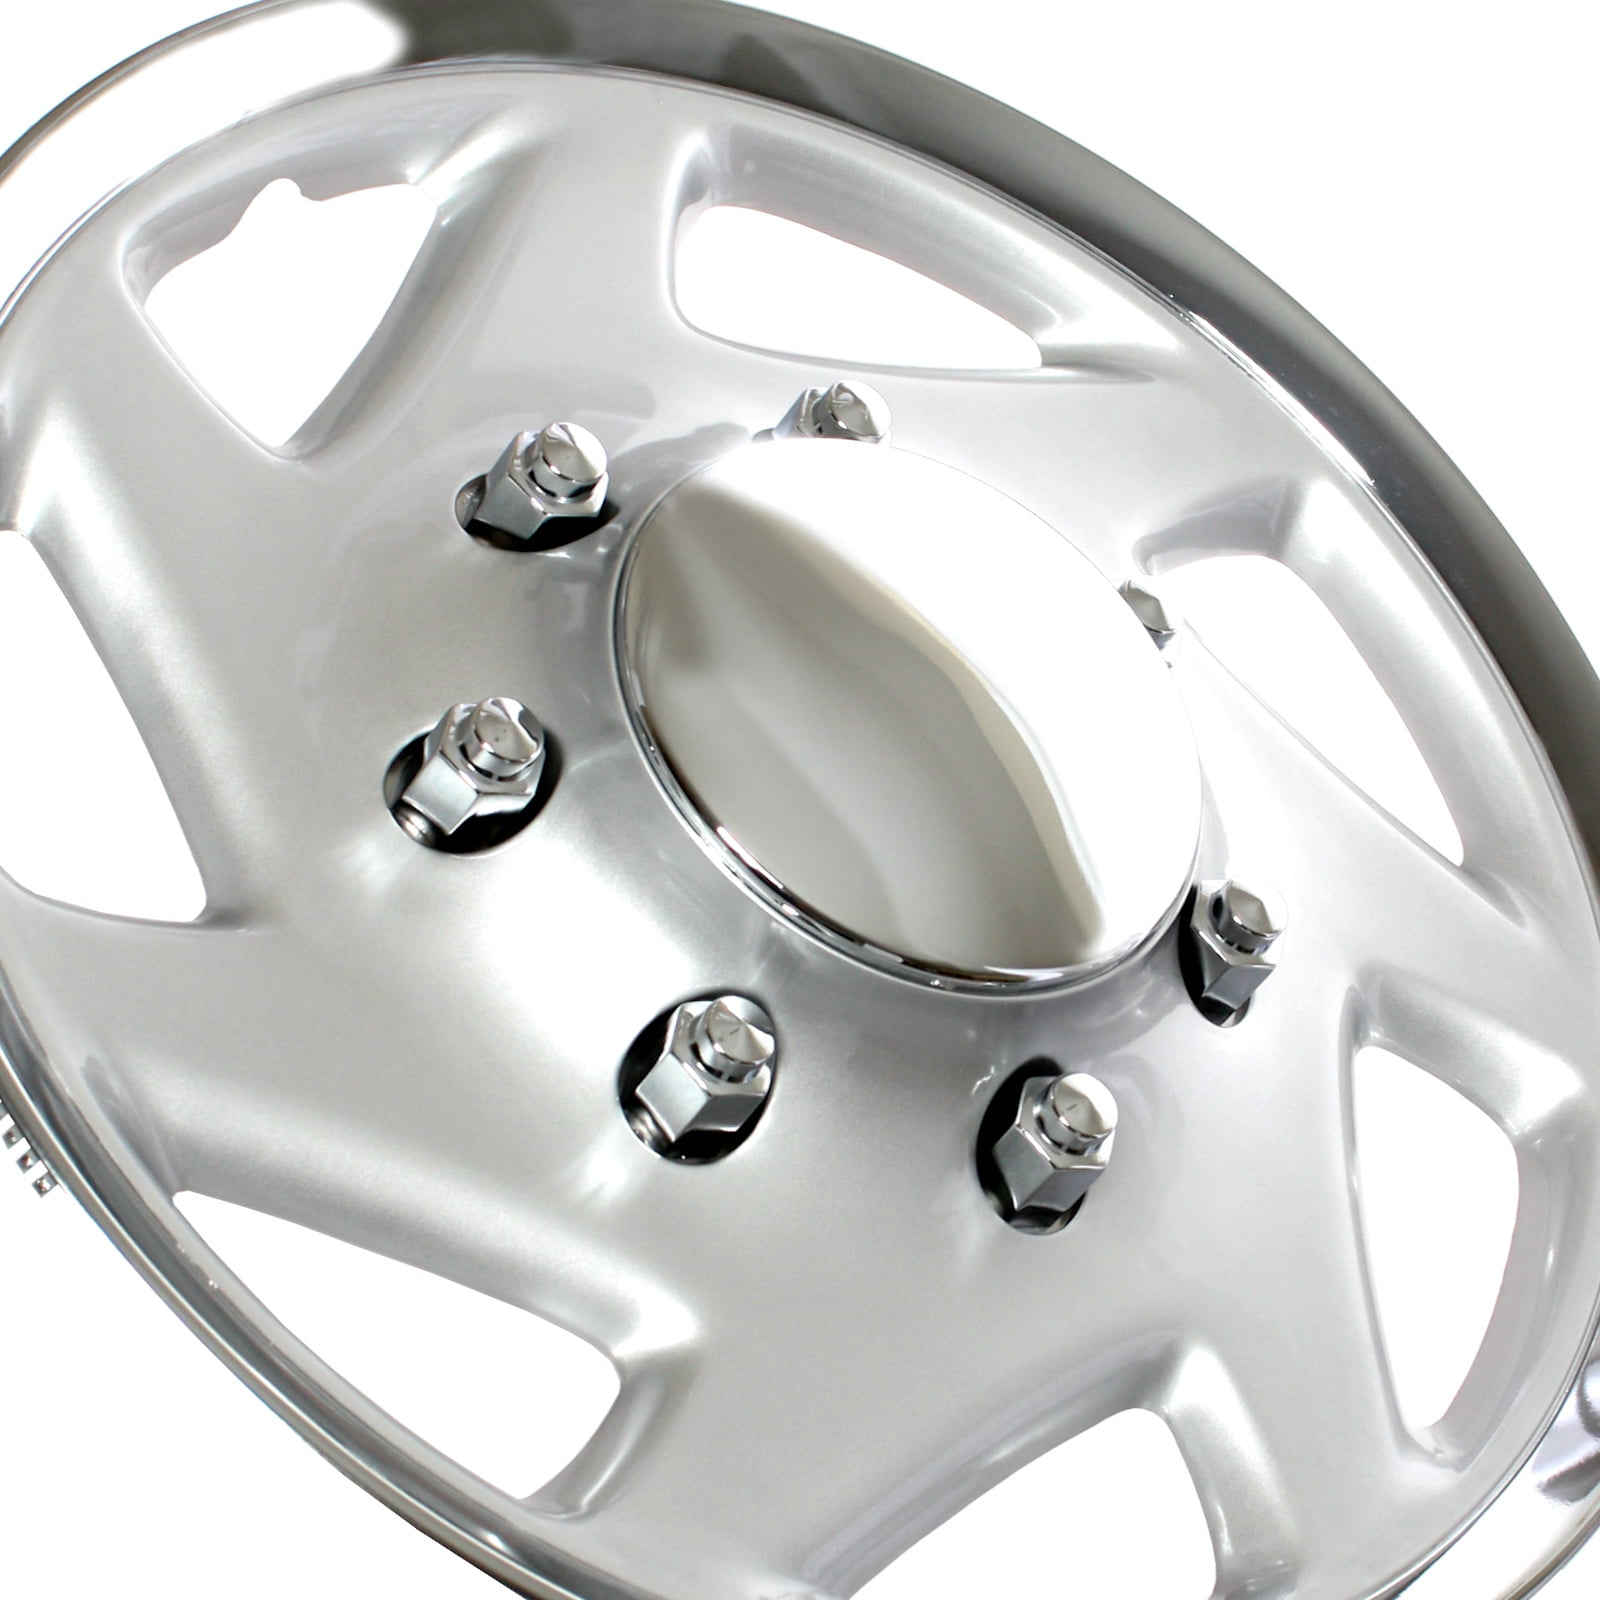 GIFT #E SET OF 4 16" UNIVERSAL WHEEL TRIMS COVER,RIMS,HUB,CAPS TO FIT FORD 